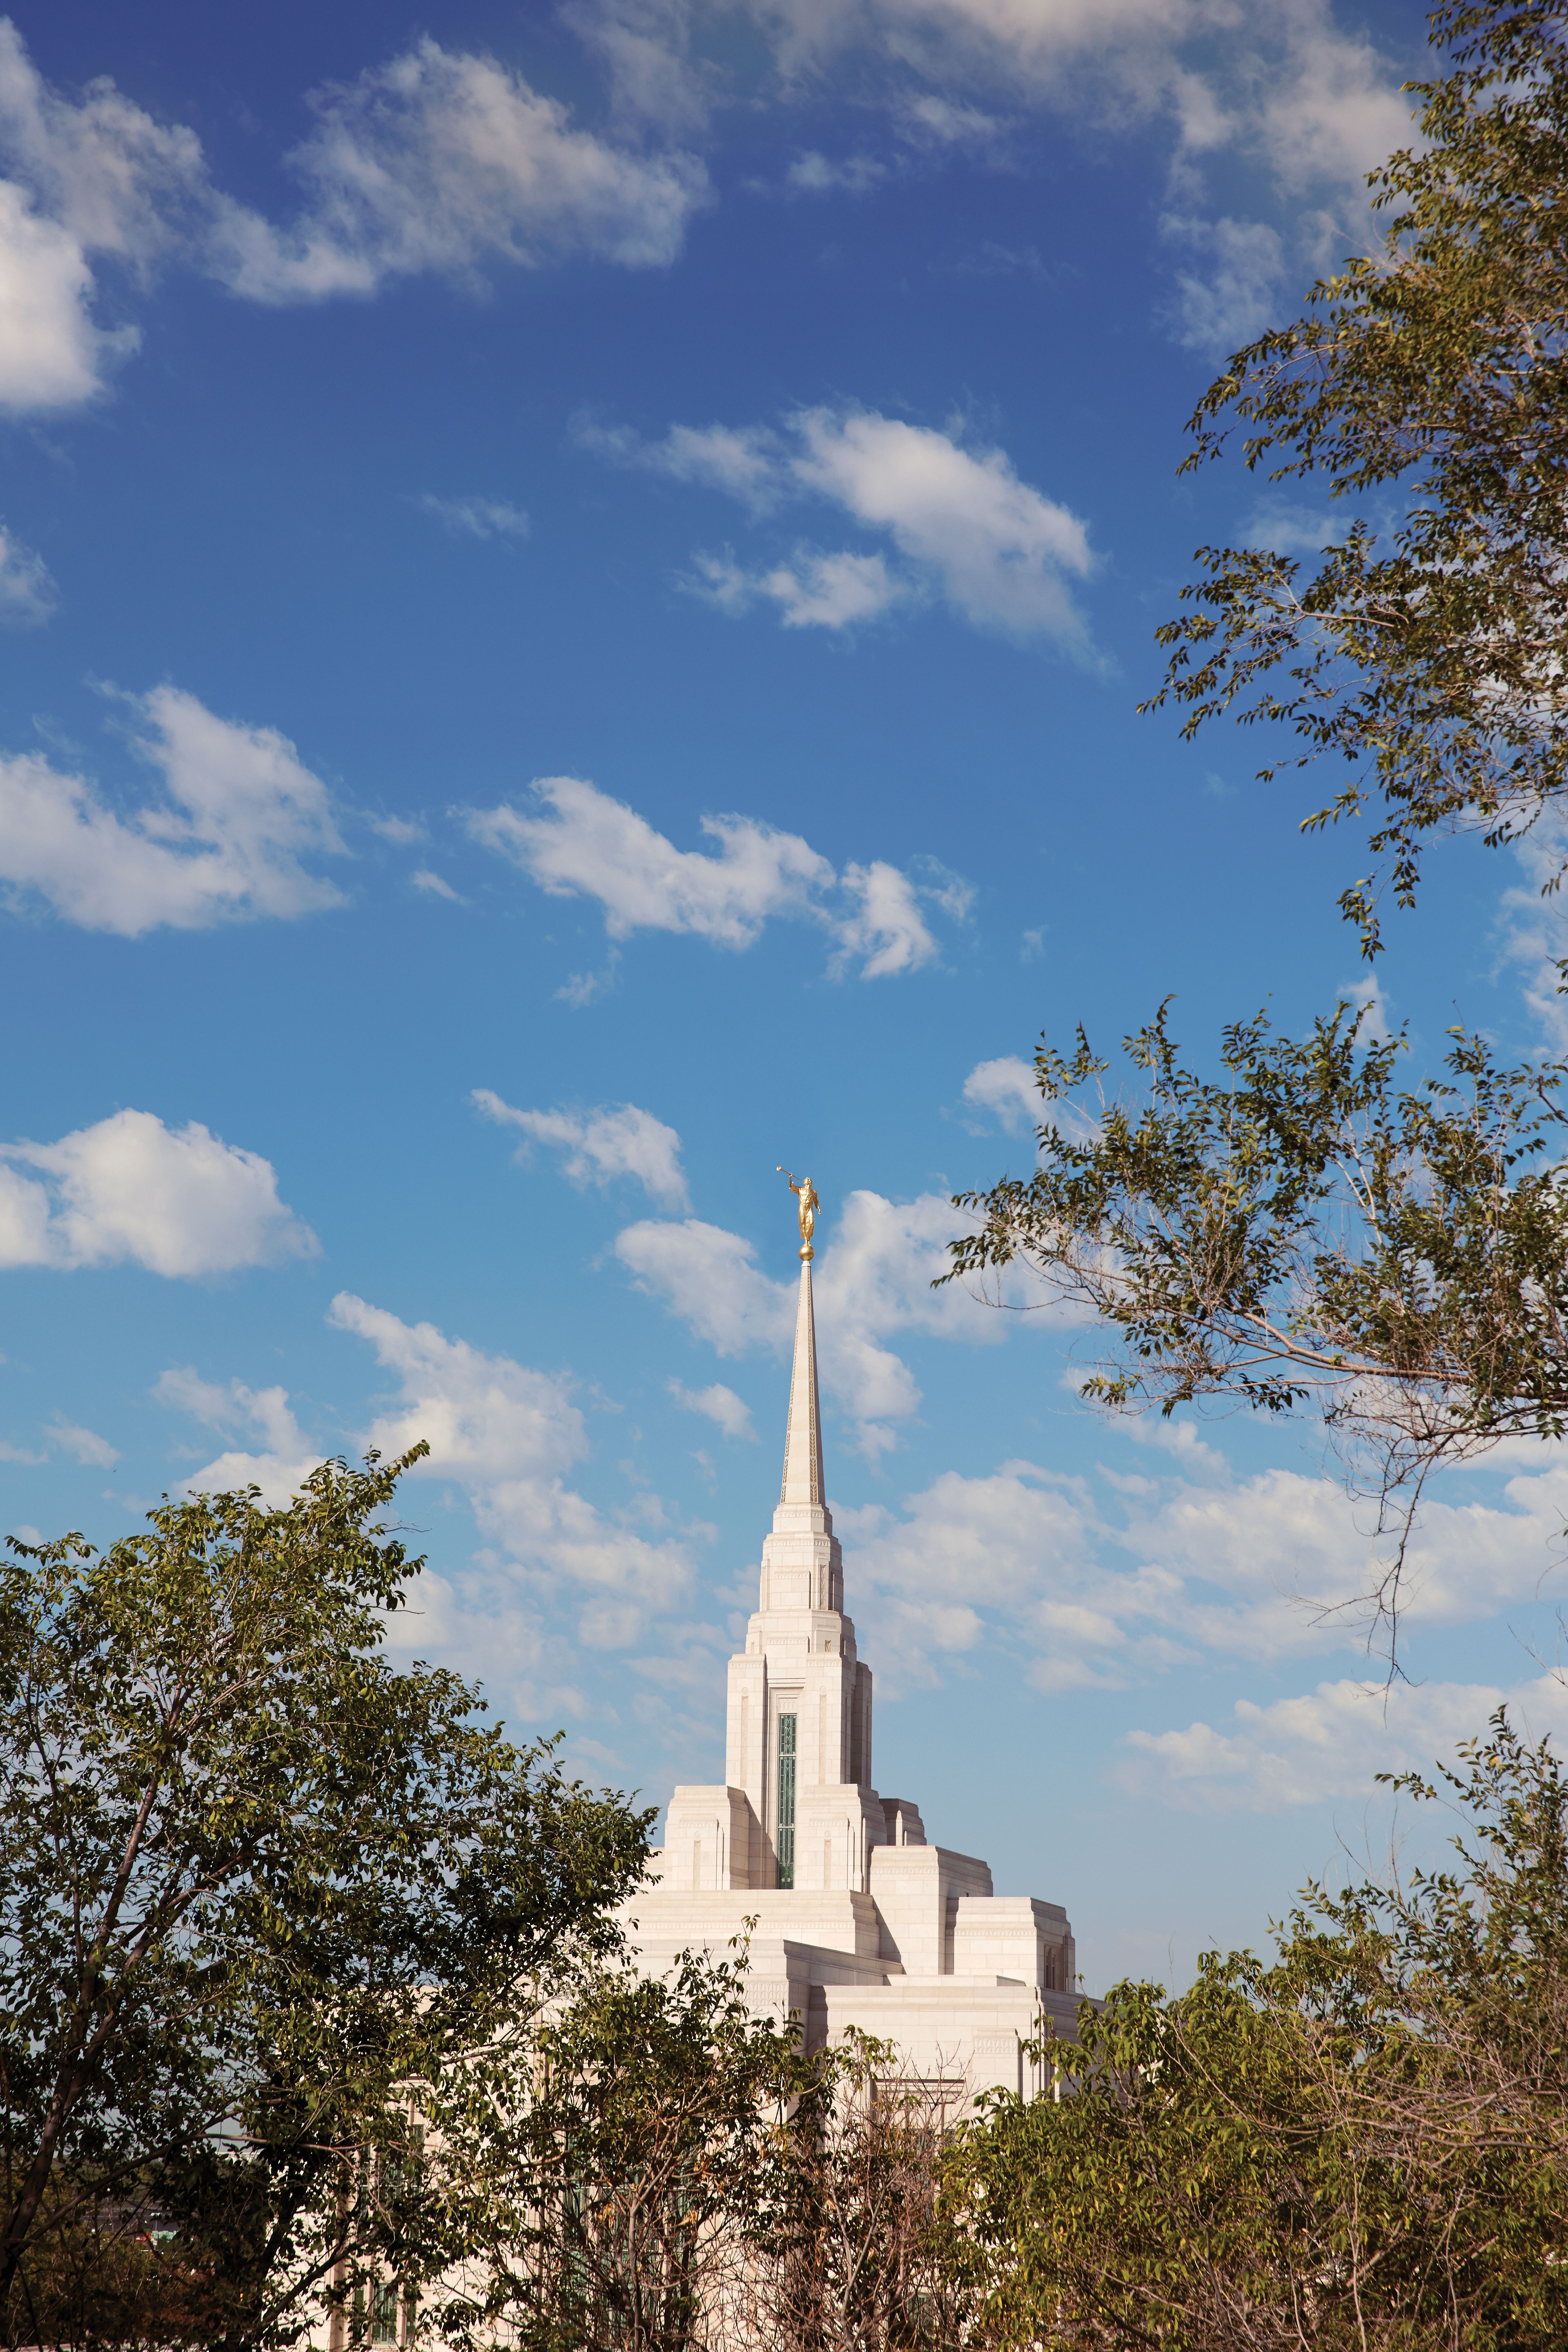 The Ogden Utah Temple spire, including the exterior of the temple and scenery.